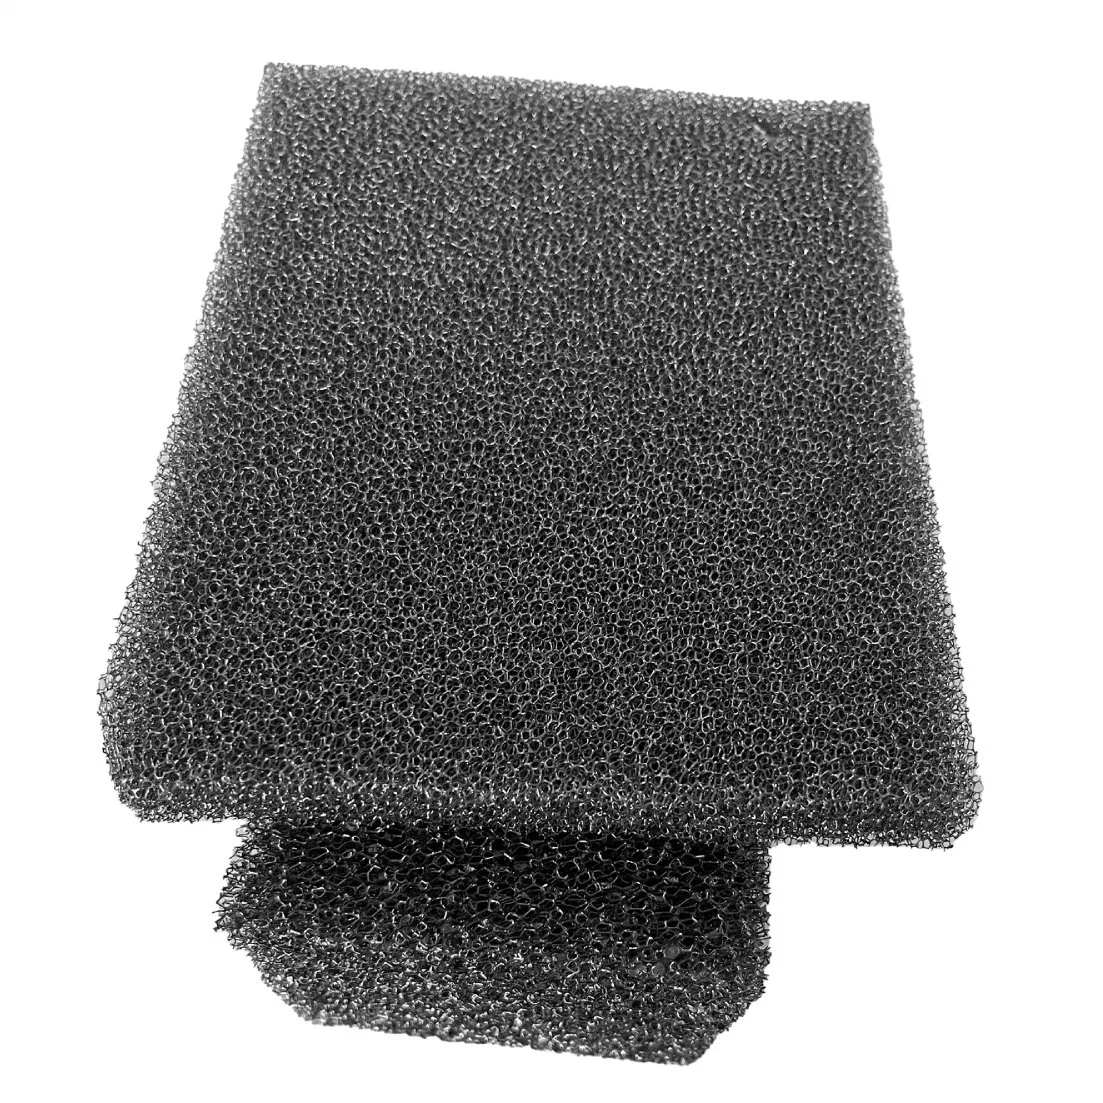 Boat Seat Cushion Replacement Open Cell Fast Dry Filter Foam Sponge